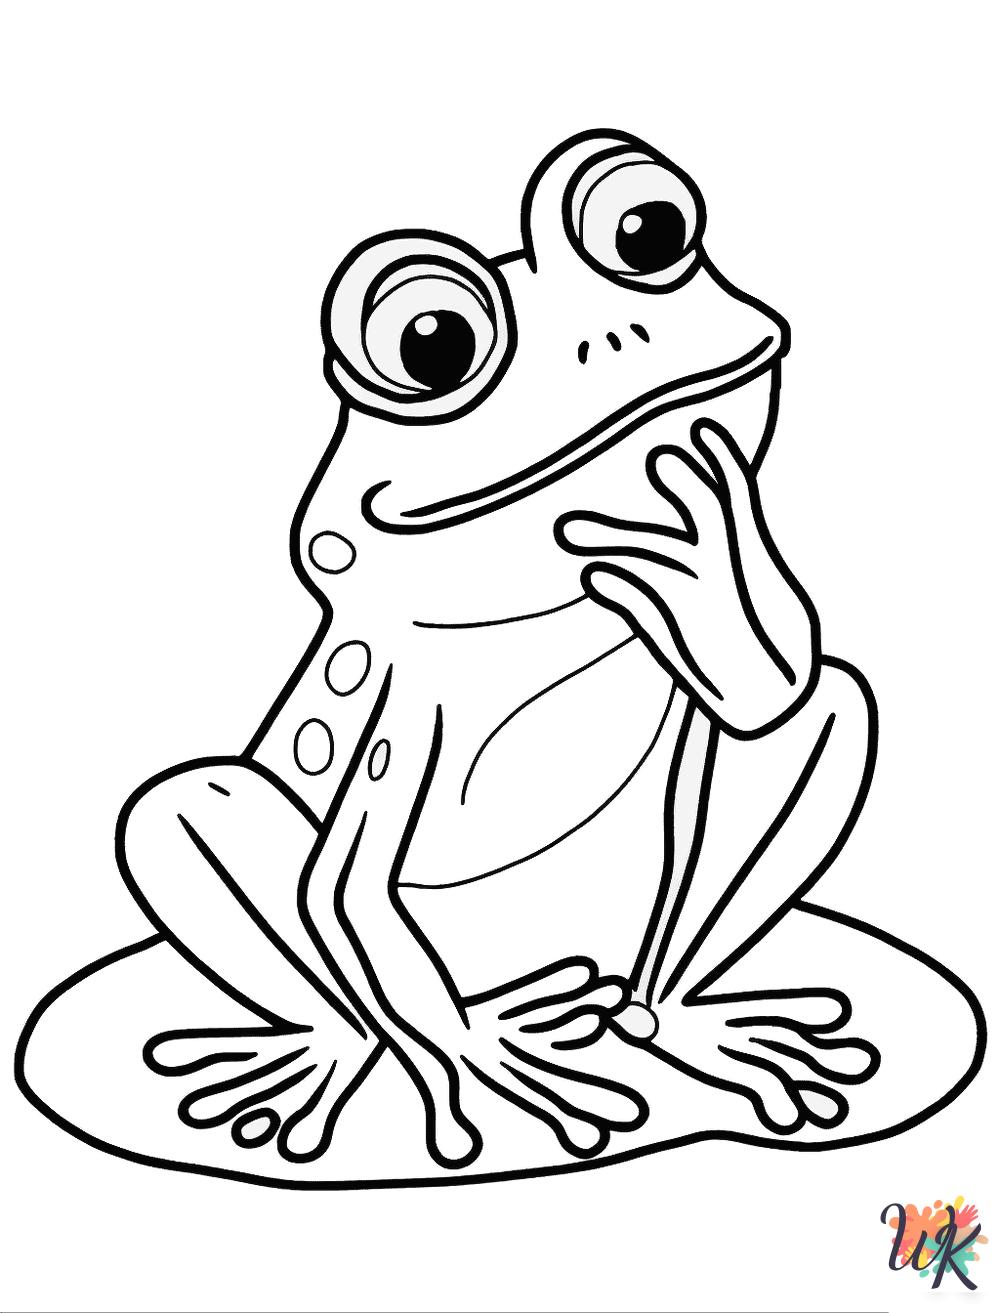 Frog coloring pages free